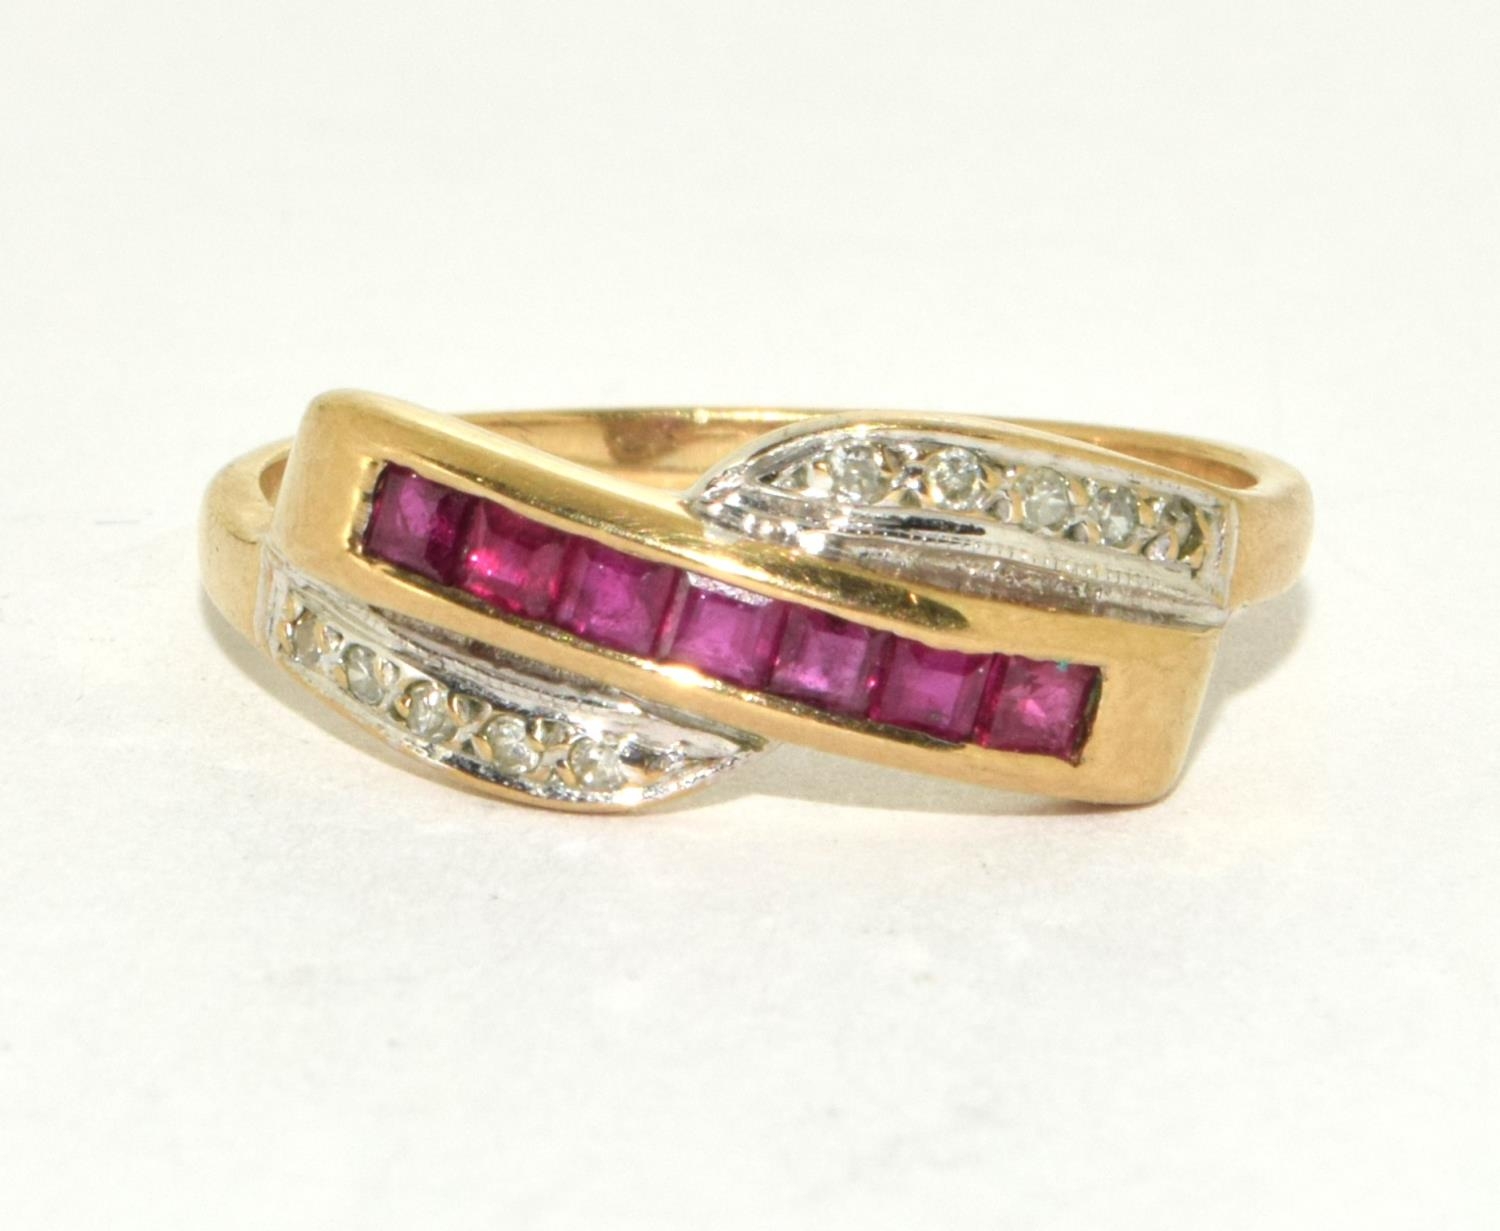 9ct gold ladies Diamond and Ruby cross over ring size R - Image 5 of 5